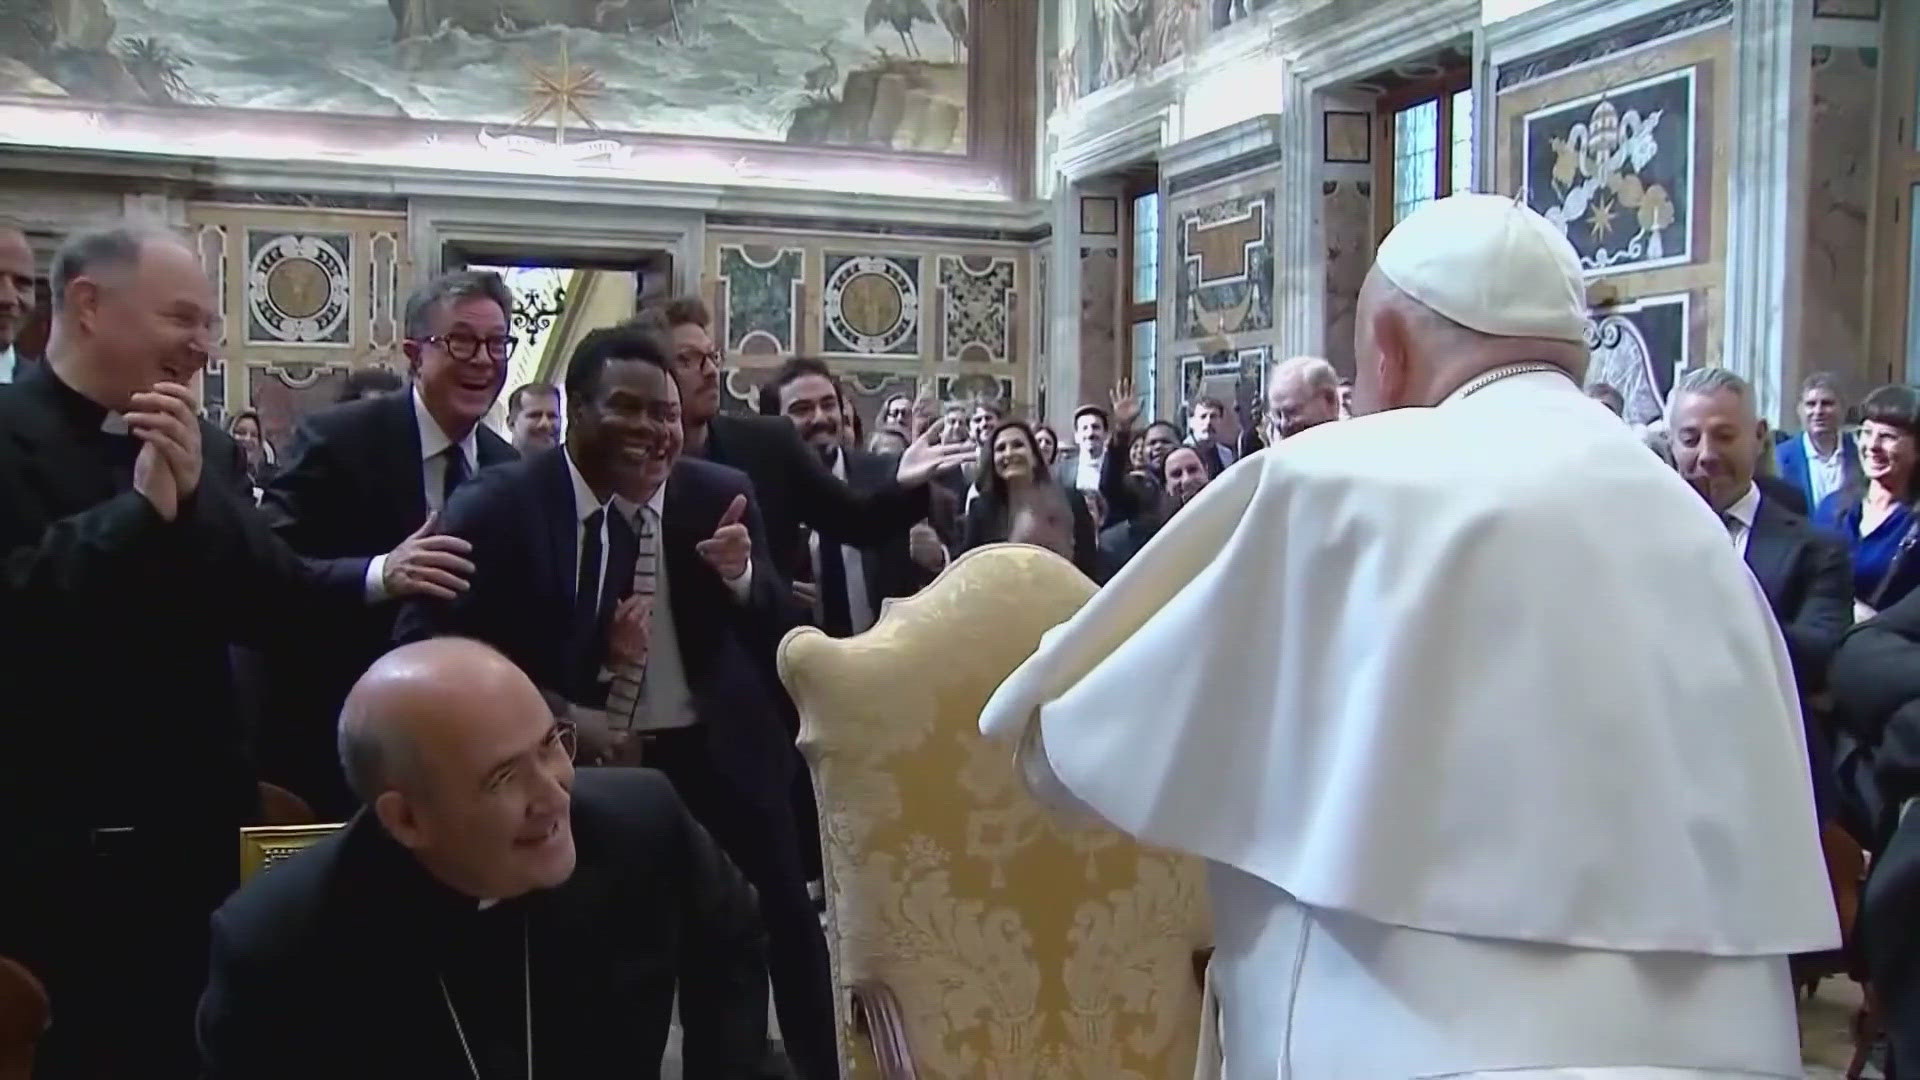 Pope Francis hosted a very different audience at the Vatican on Friday celebrating the importance of humor.